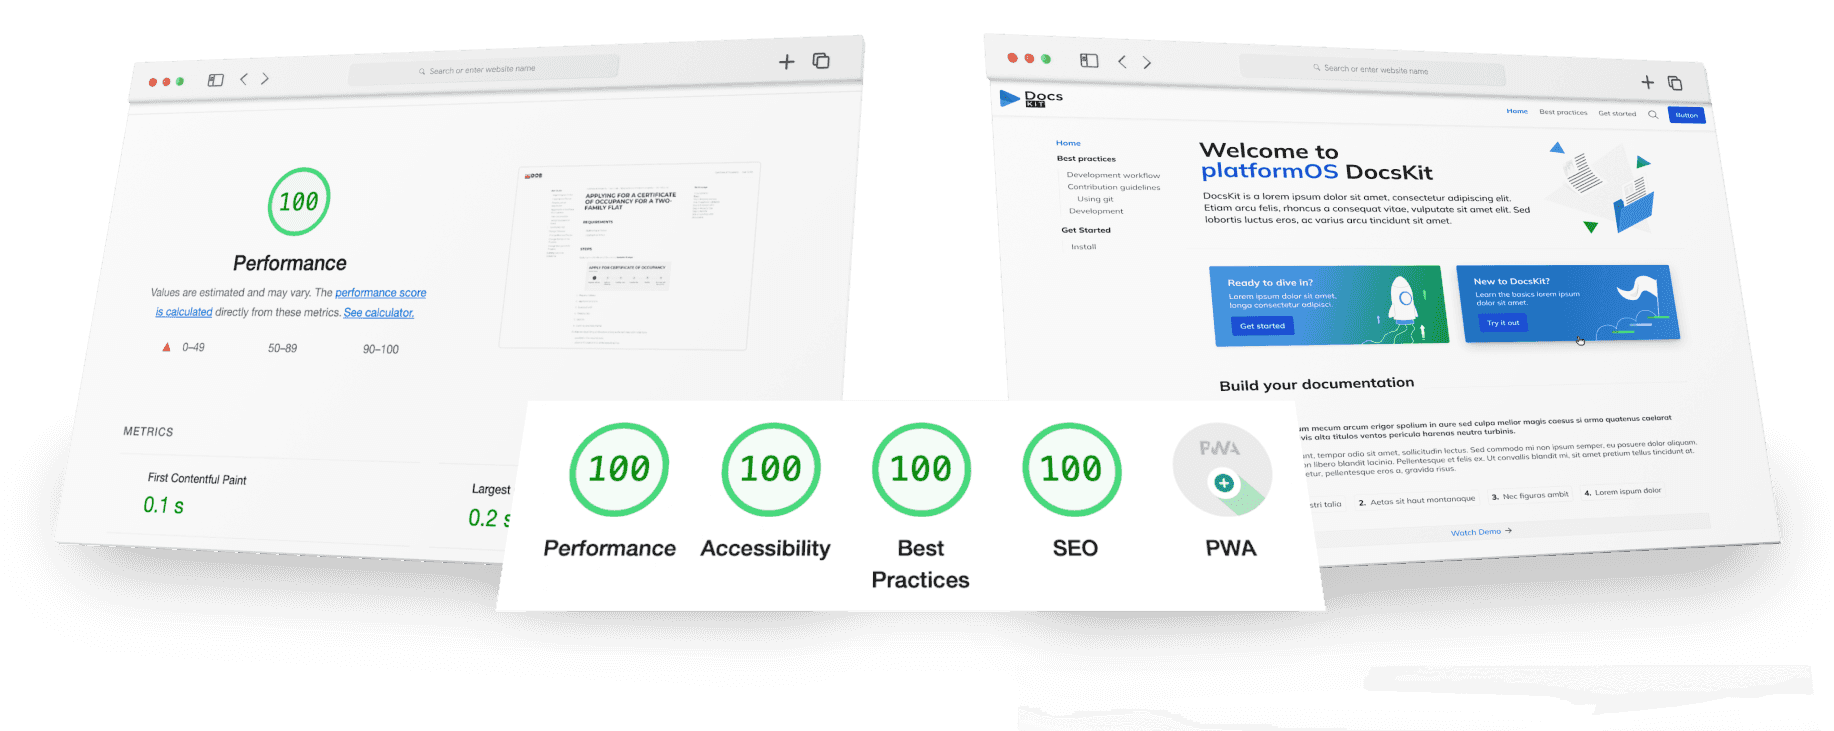 Optimized for performance, accessibility, sustainability and SEO